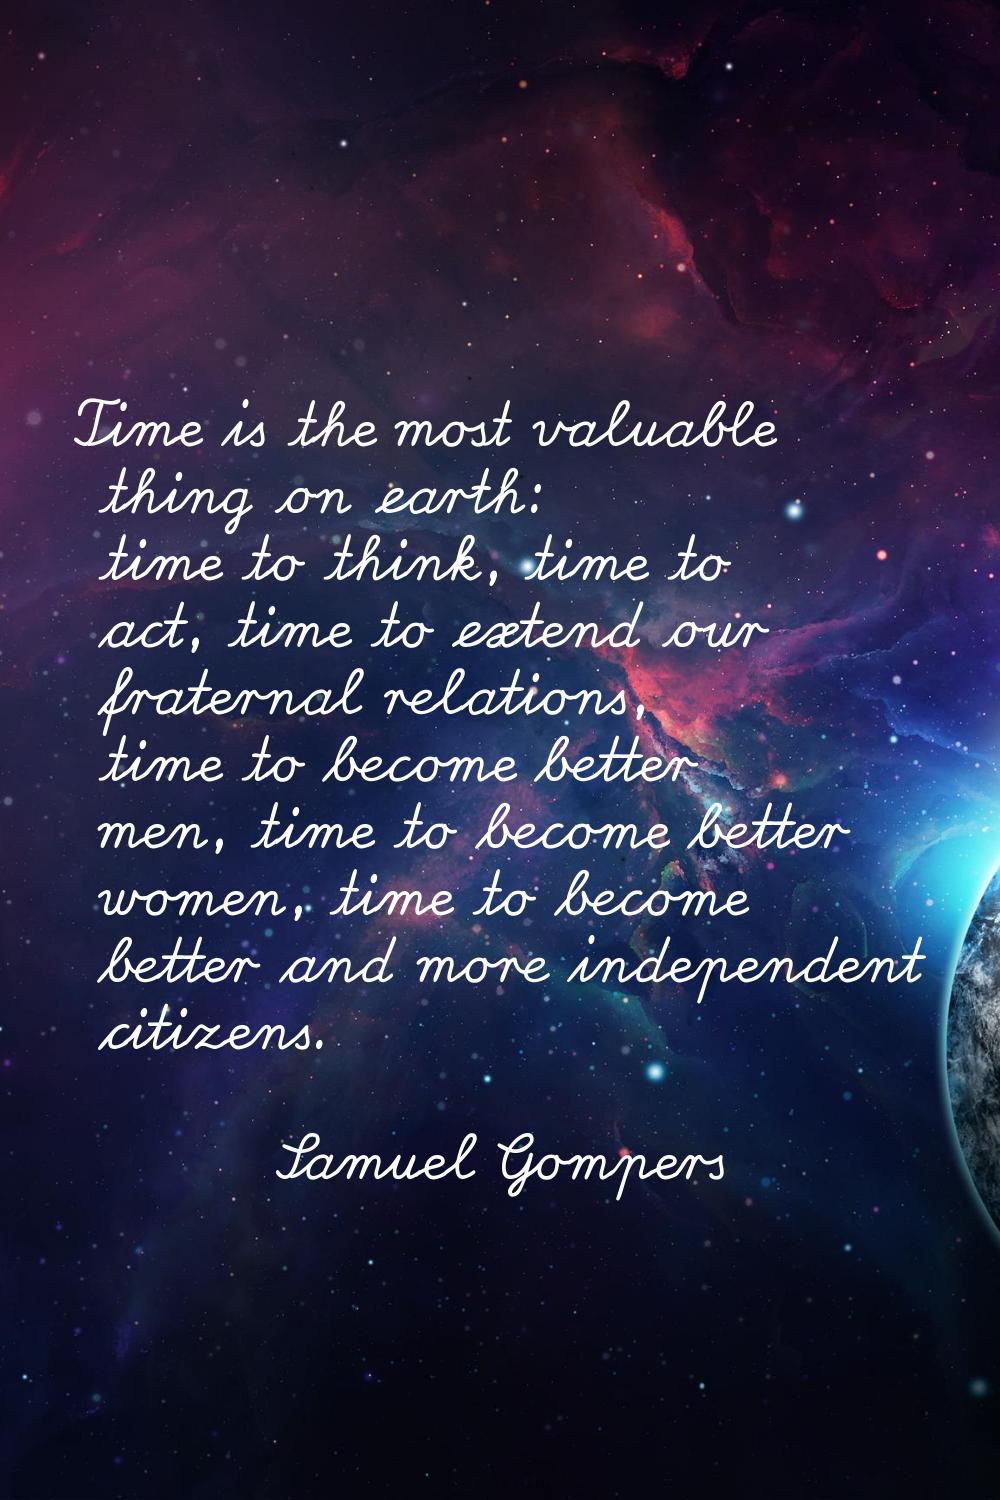 Time is the most valuable thing on earth: time to think, time to act, time to extend our fraternal 